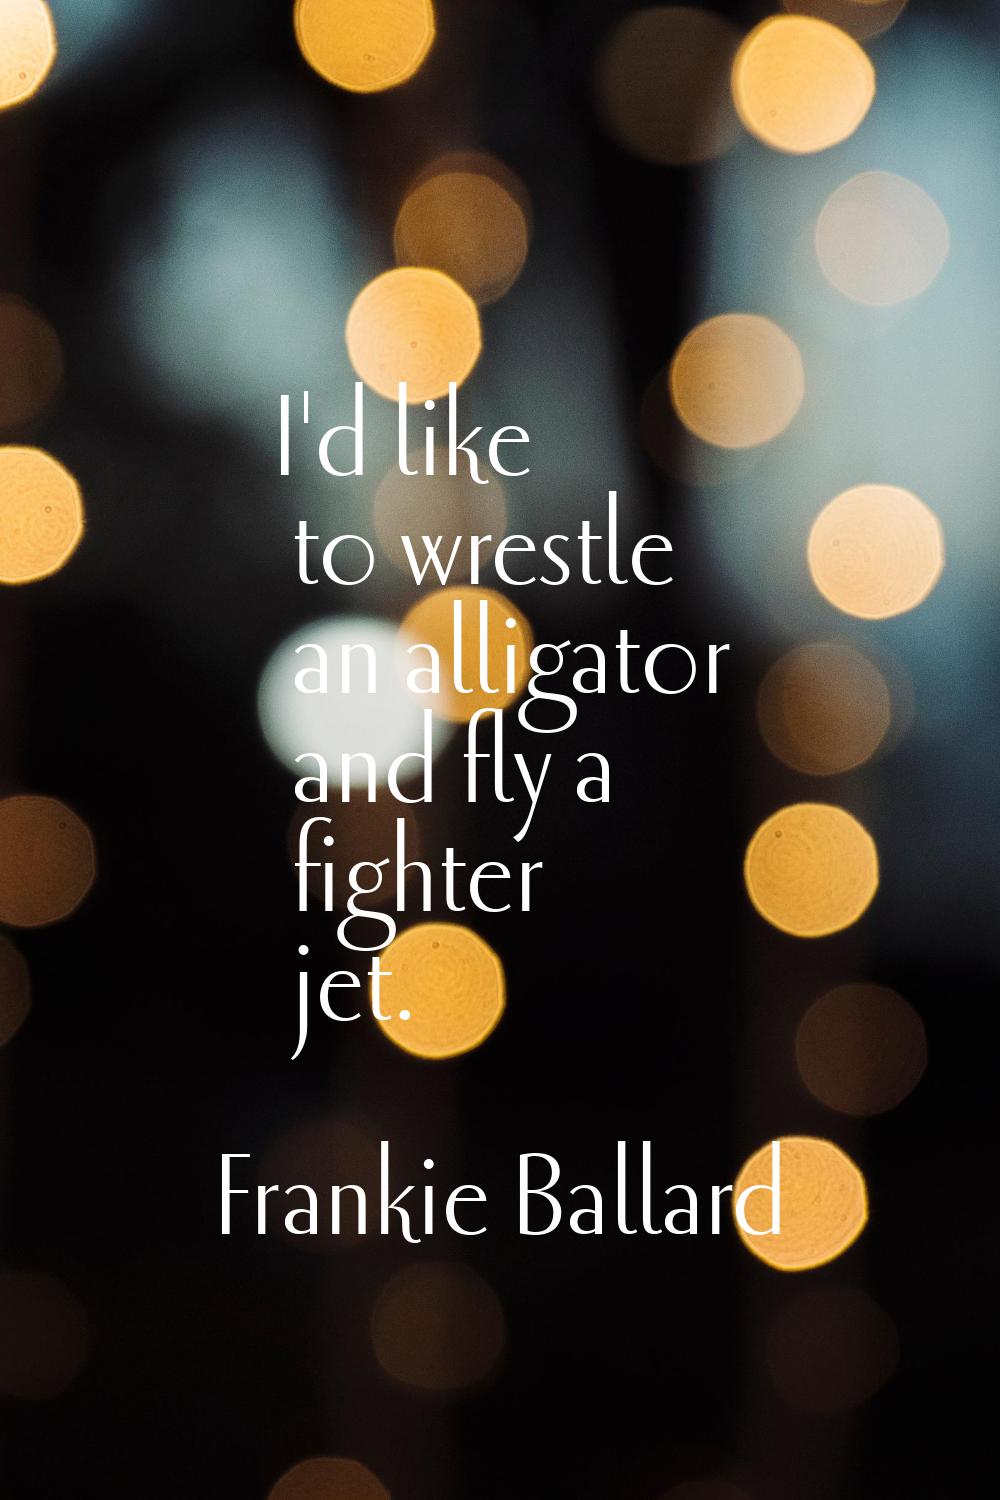 I'd like to wrestle an alligator and fly a fighter jet.